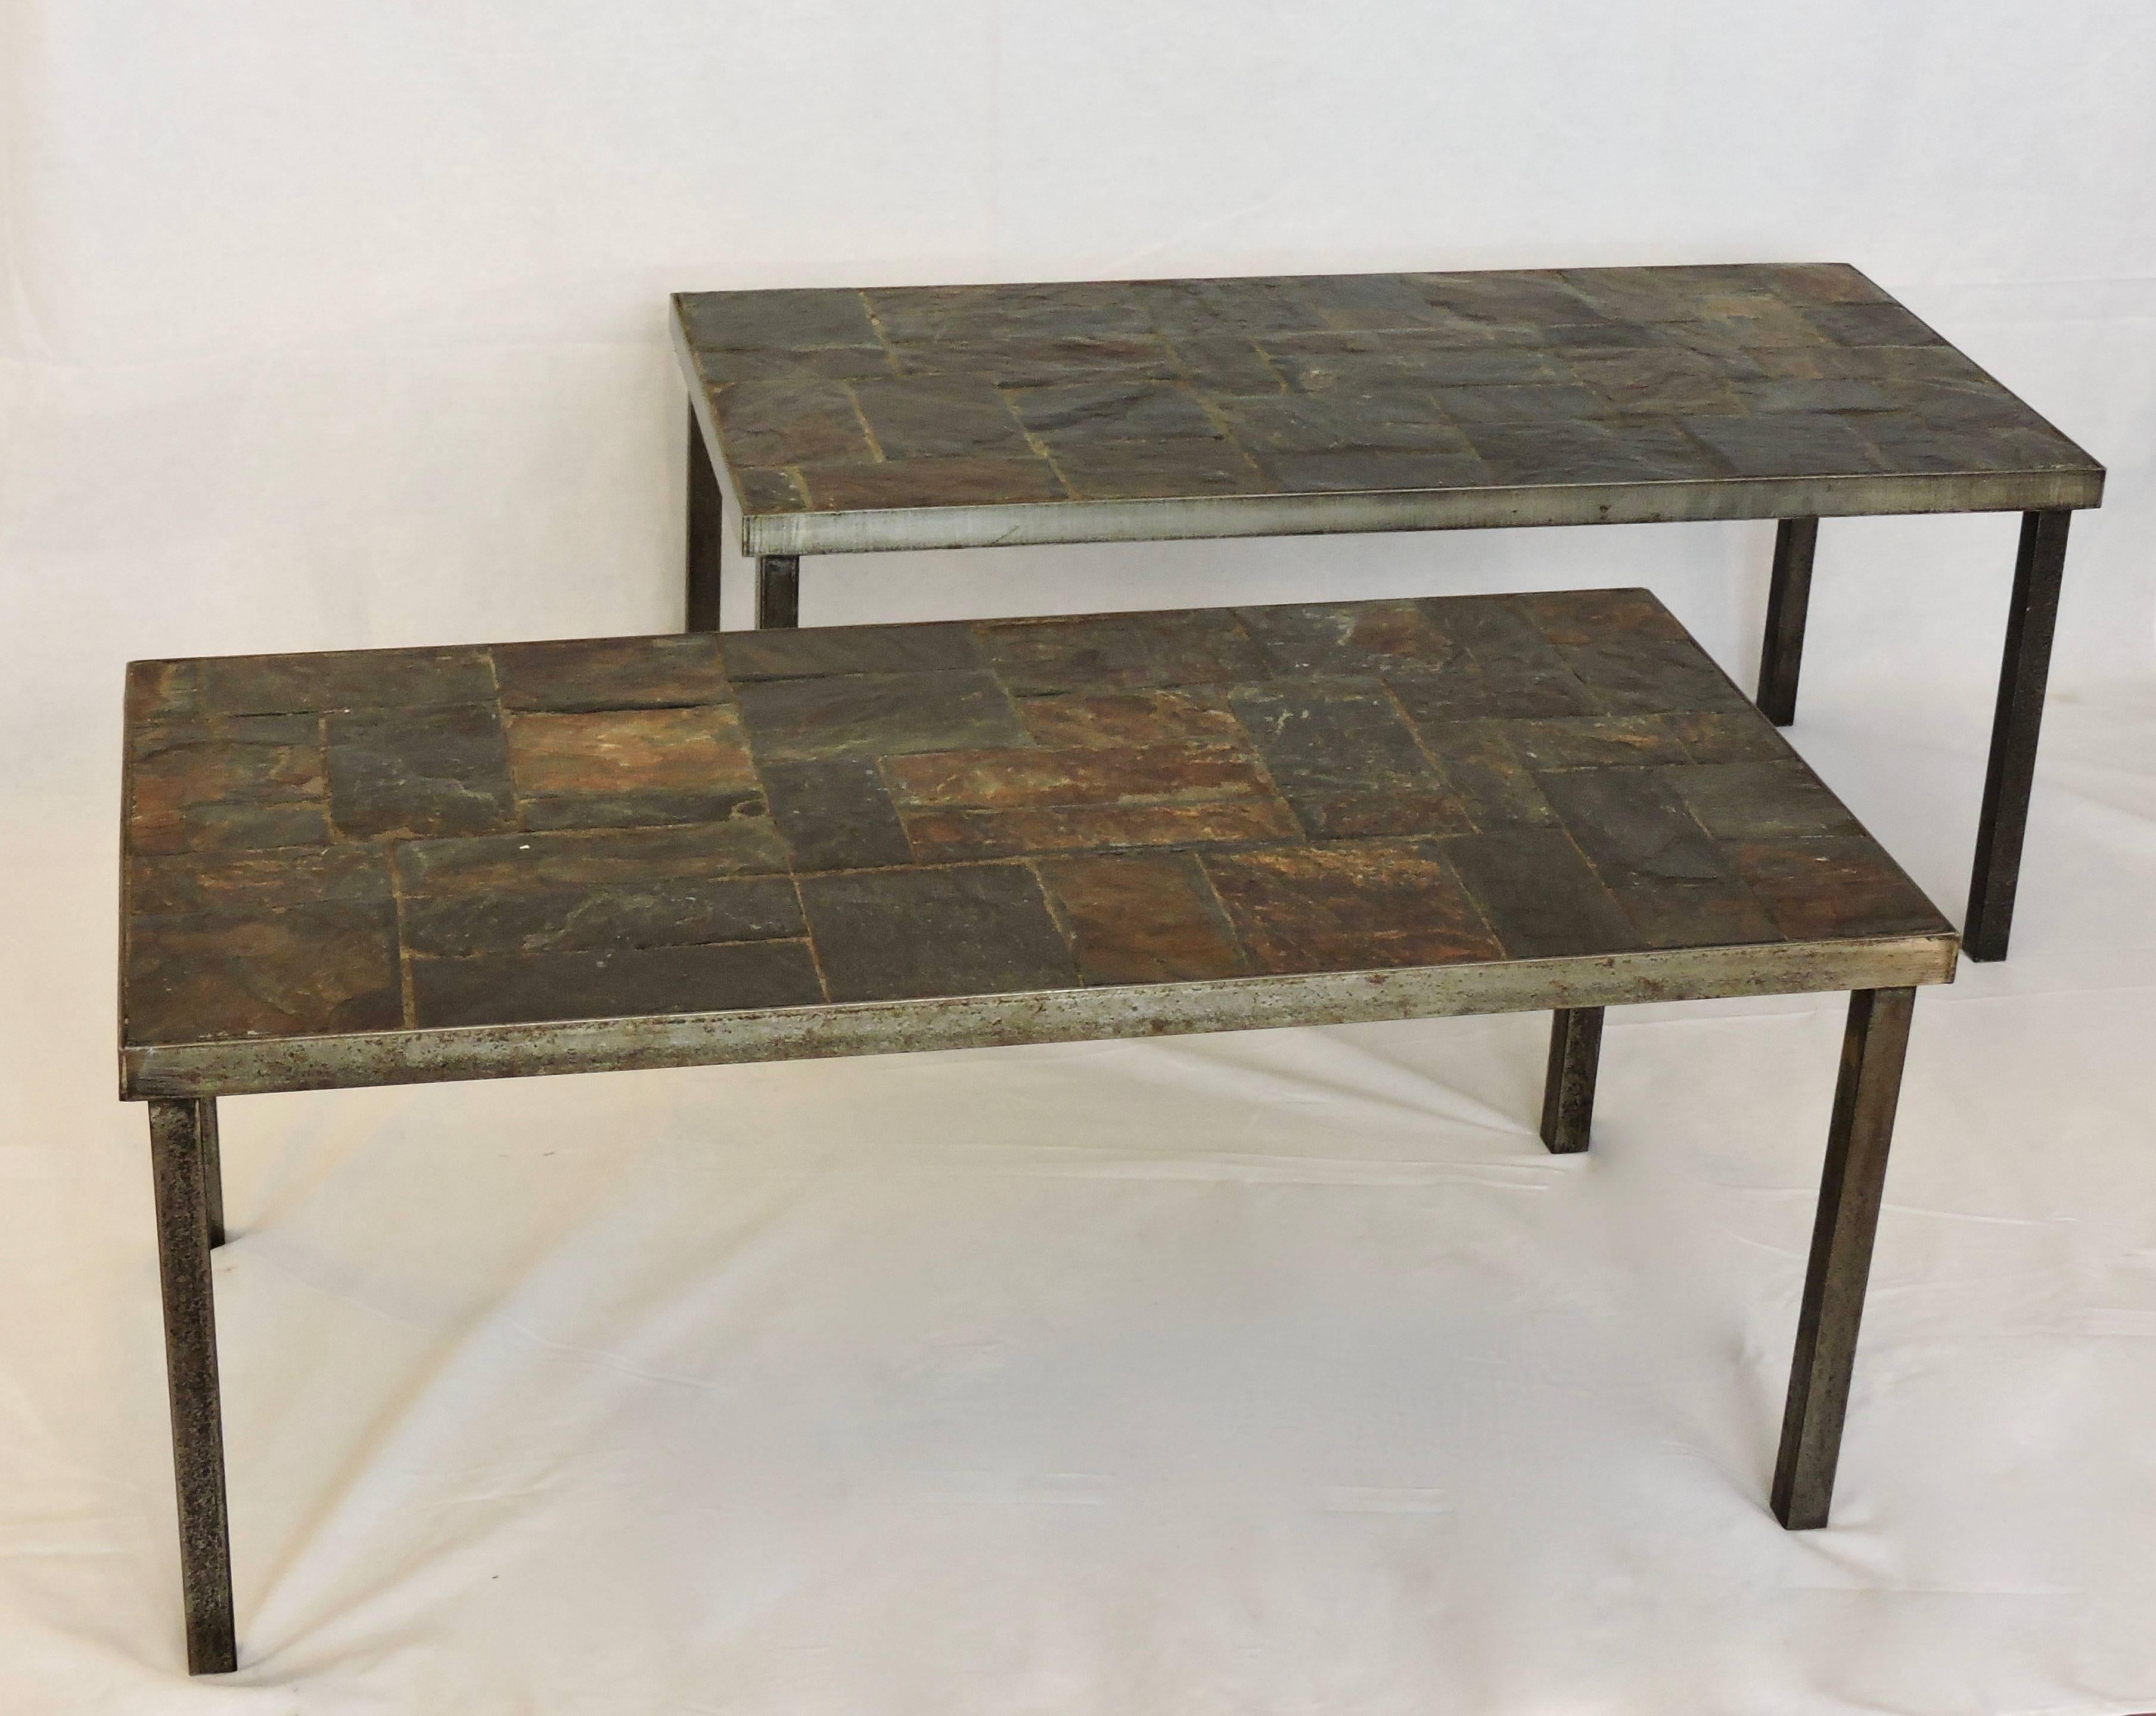 A pair of coffee tables, made from lava stone and wrought iron.
Attributed to Maison Jansen.